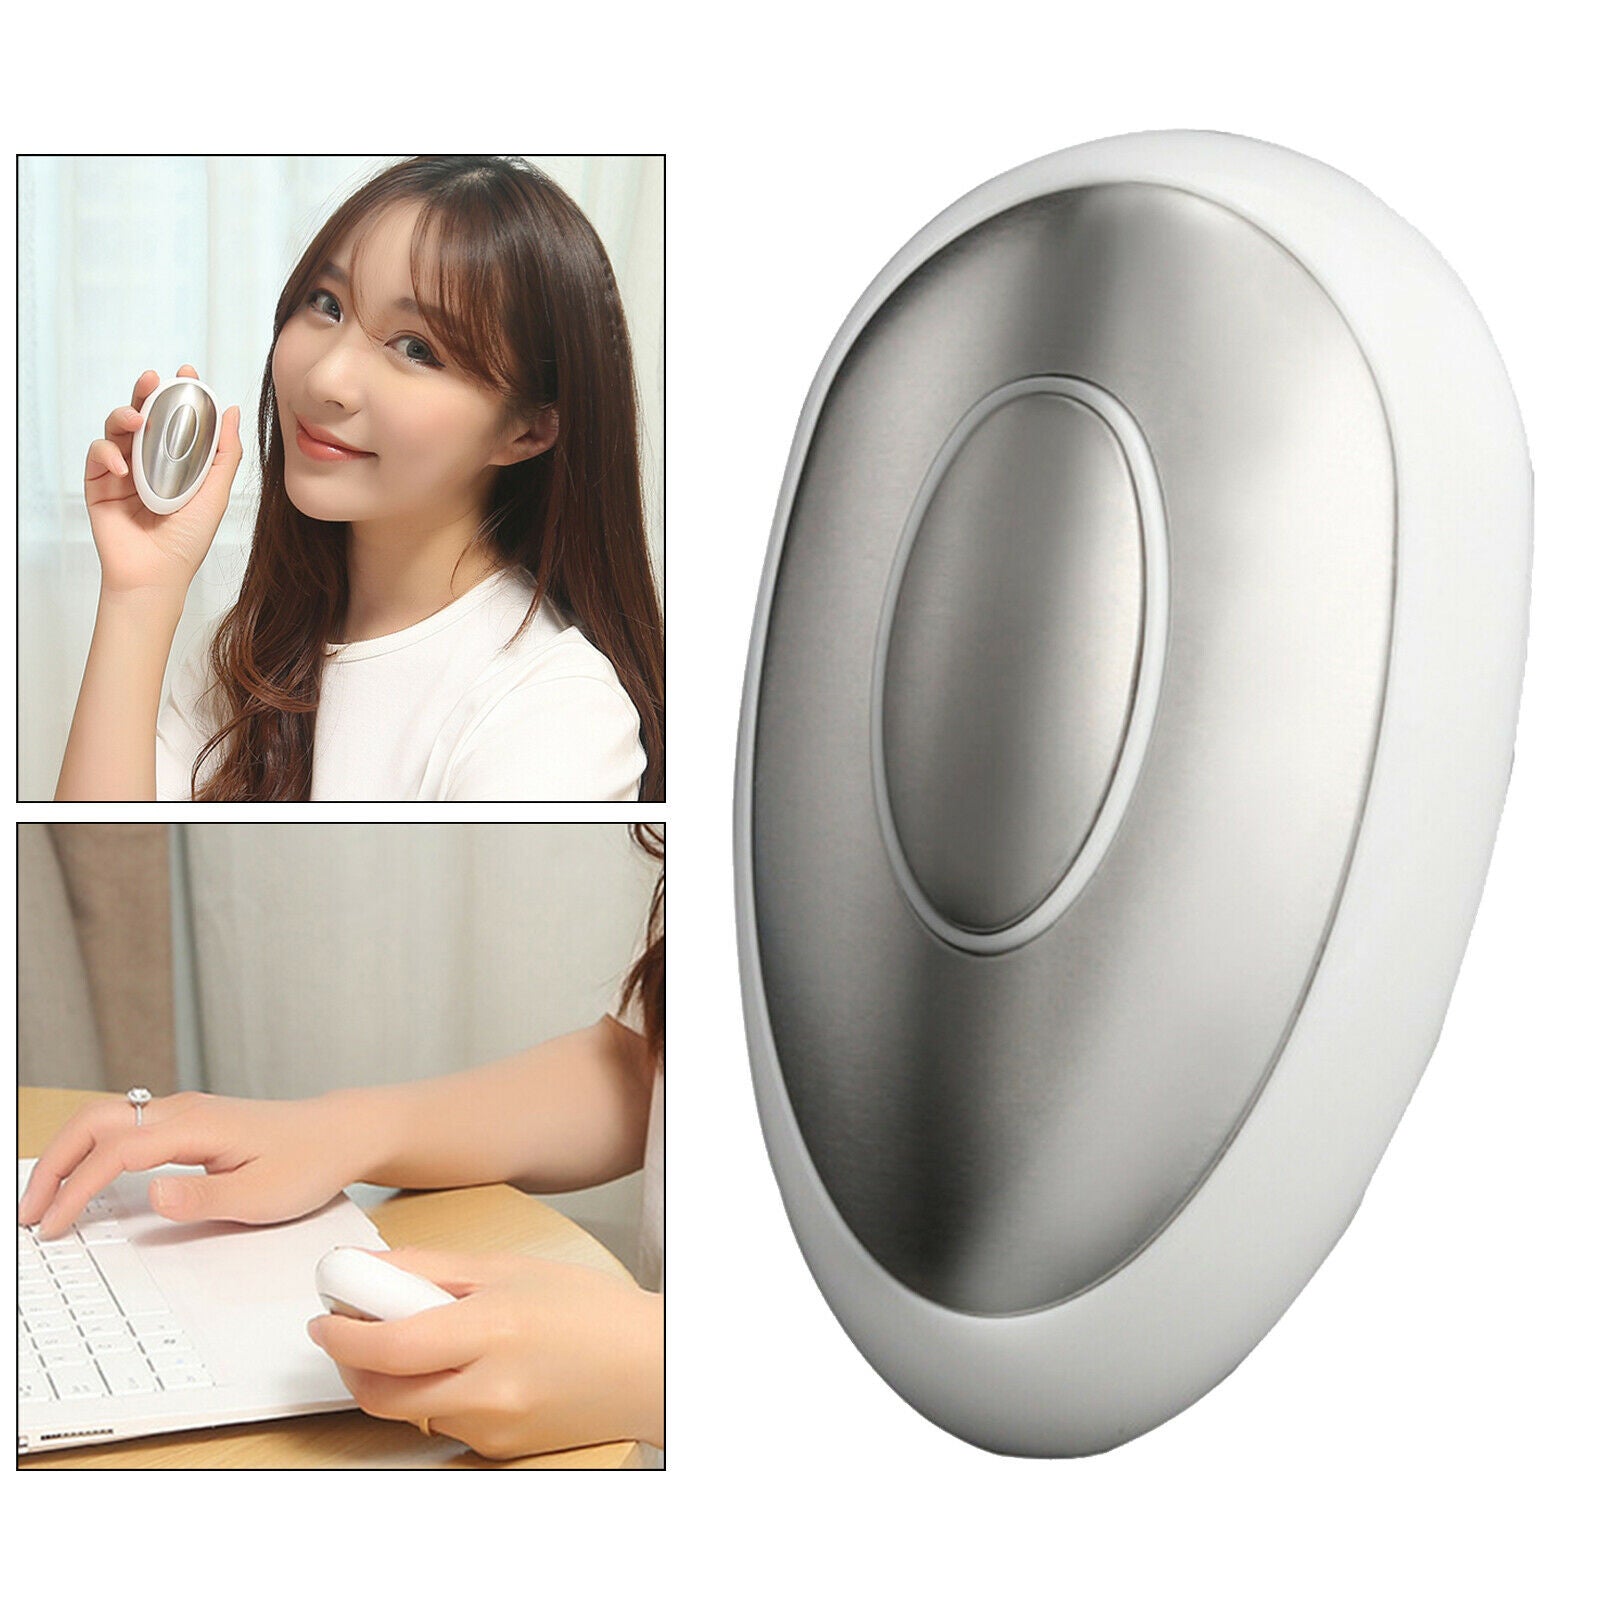 Hand-Held Sleep Holding Device Pressure Release Message Battery Operated